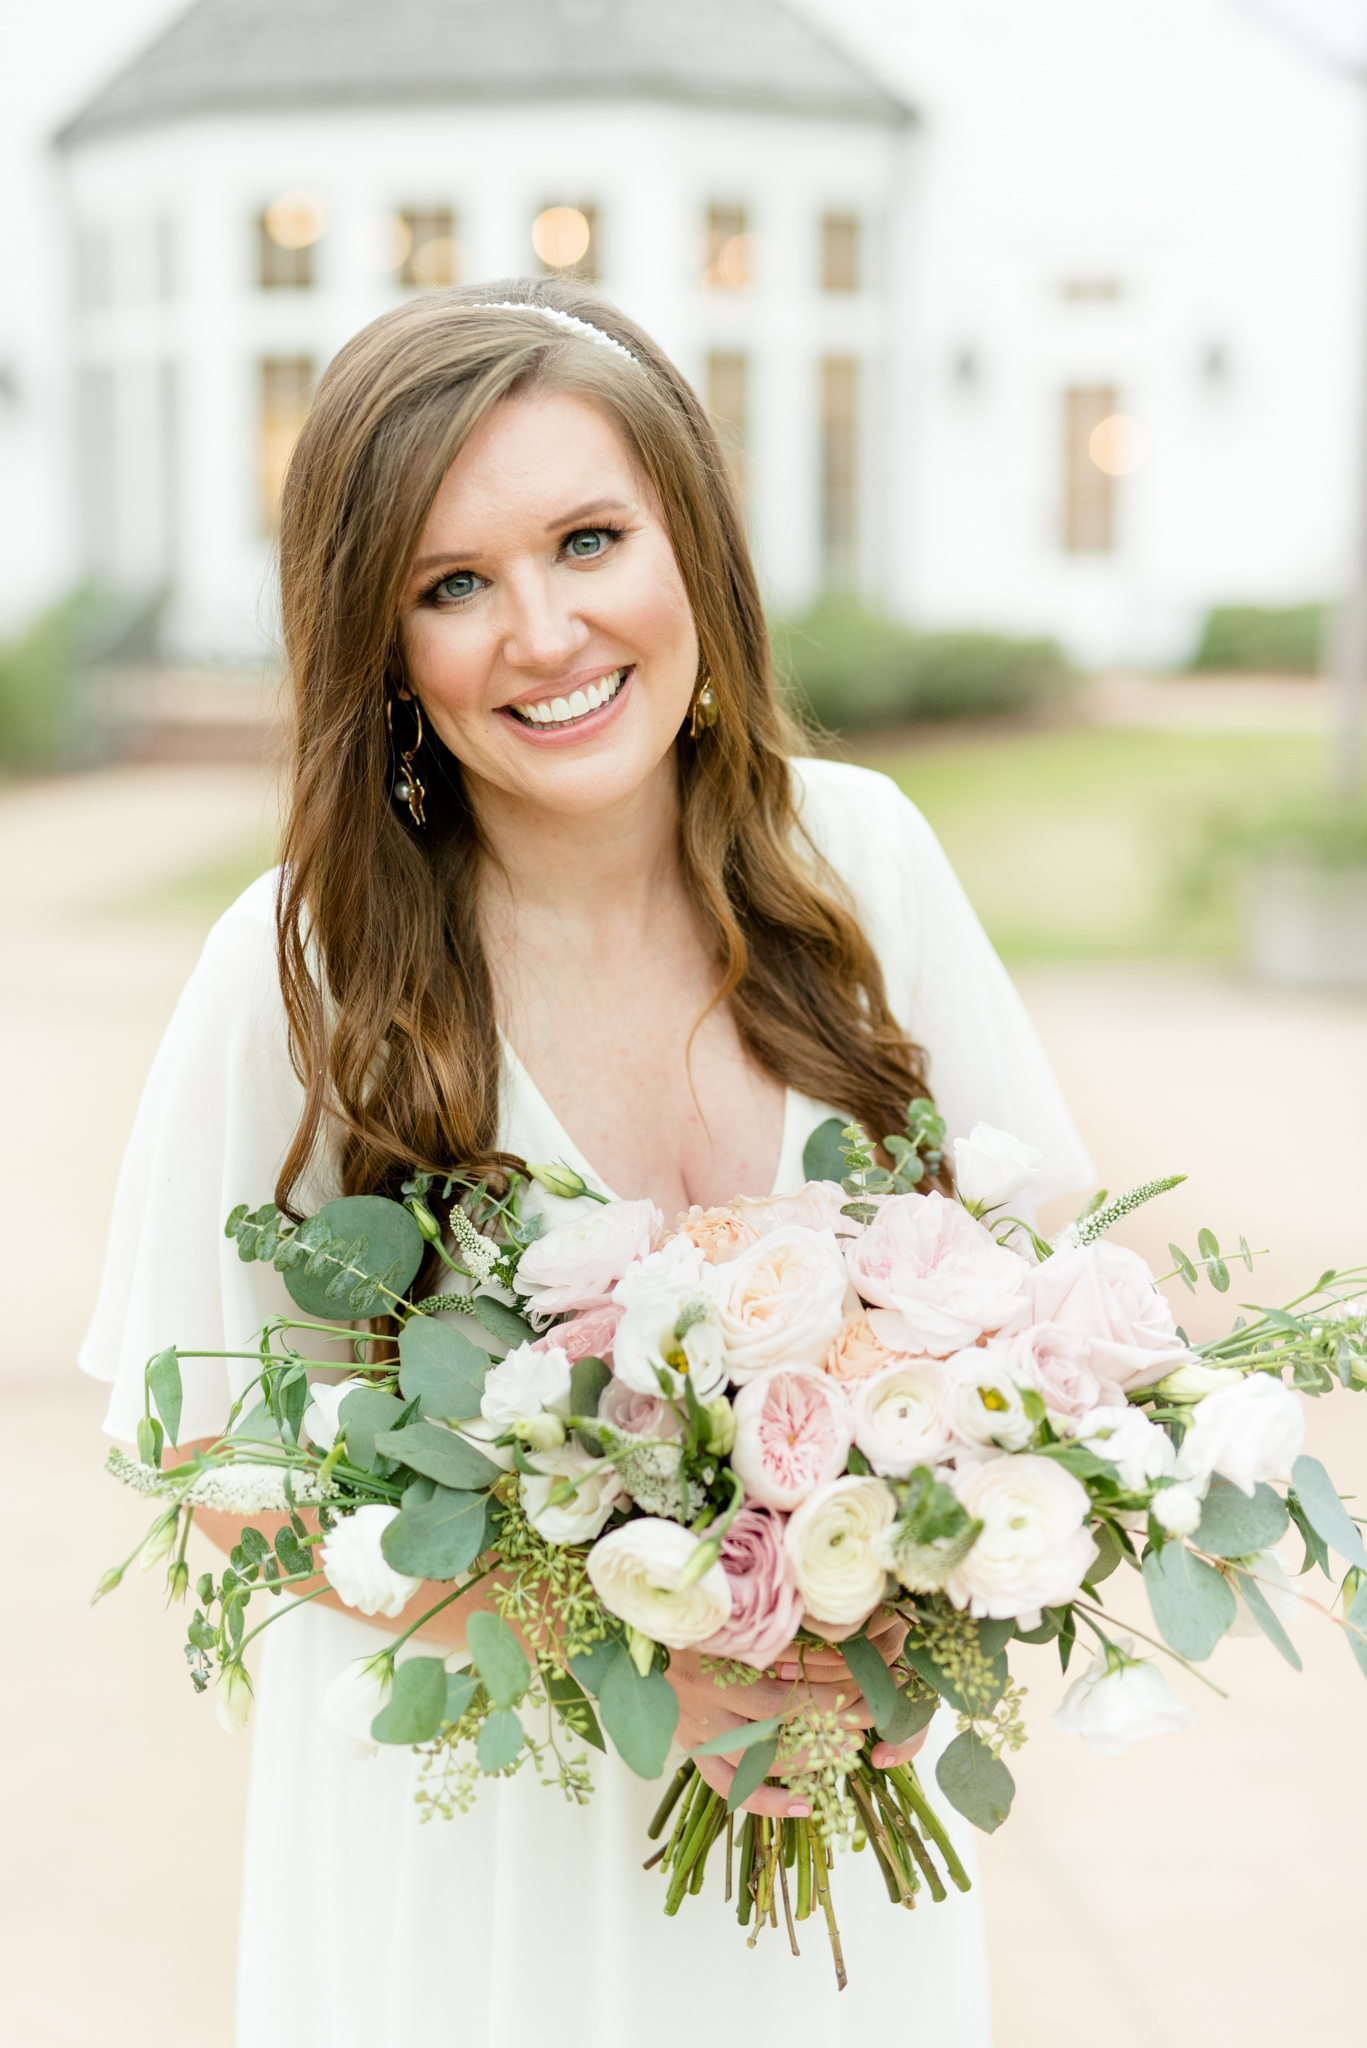 Bride smiles at camera with flowers in hand